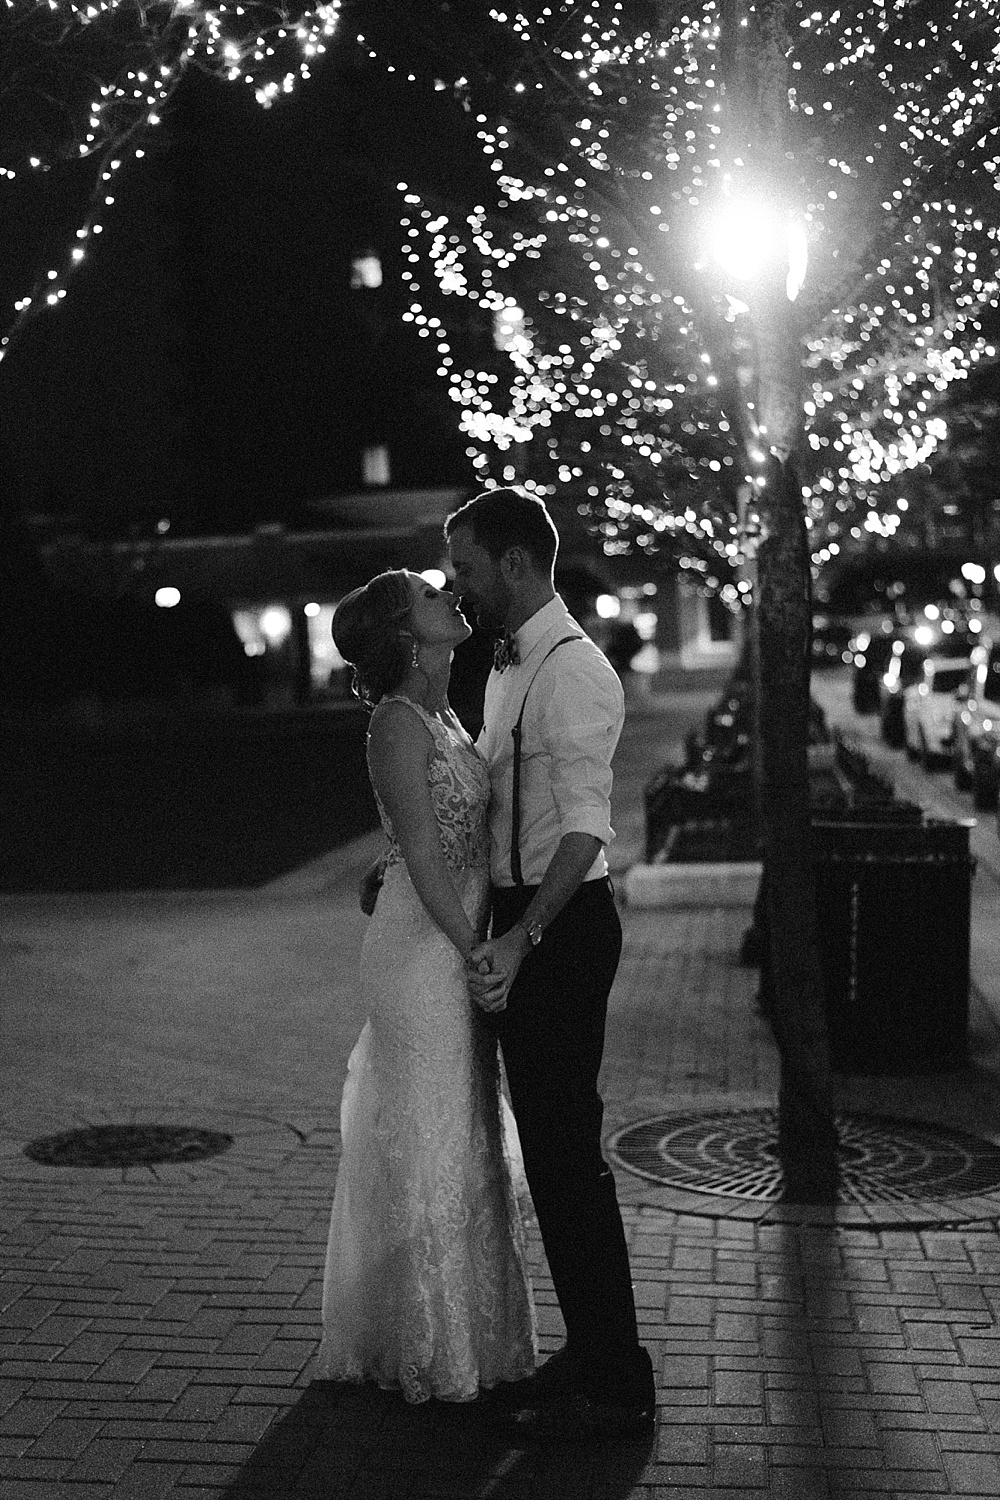 Black and white photo of bride and groom from Chicago kissing under twinkly lights in a brick alleyway.